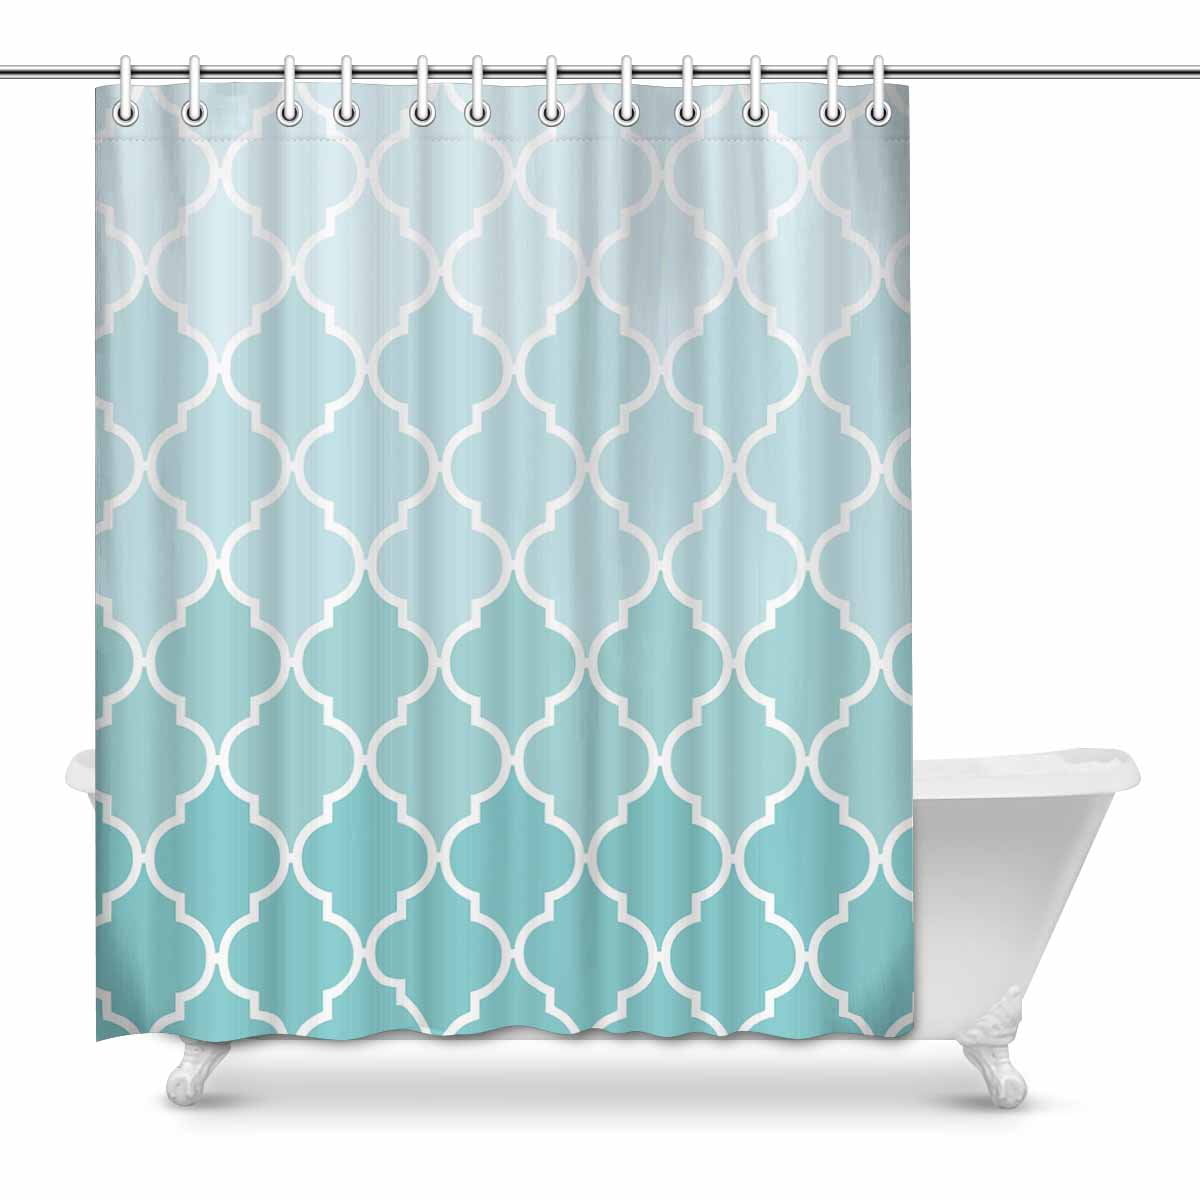 Details about   Moda at Home Shower Curtain Fabric Blue Teal White Lattice Geo Print New 